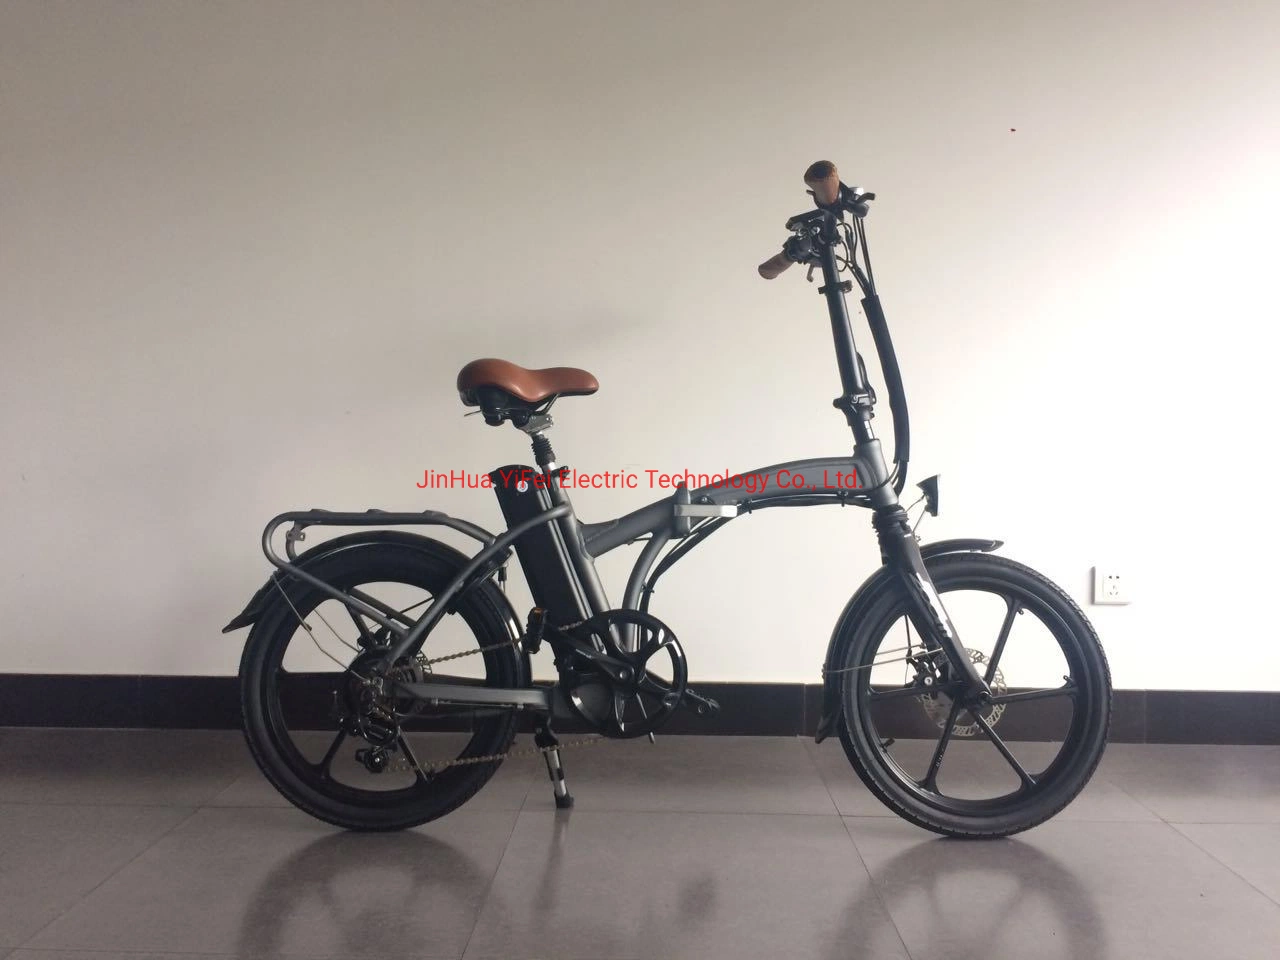 Ce 20" Urban Electric Folding Bike with Lithium Battery